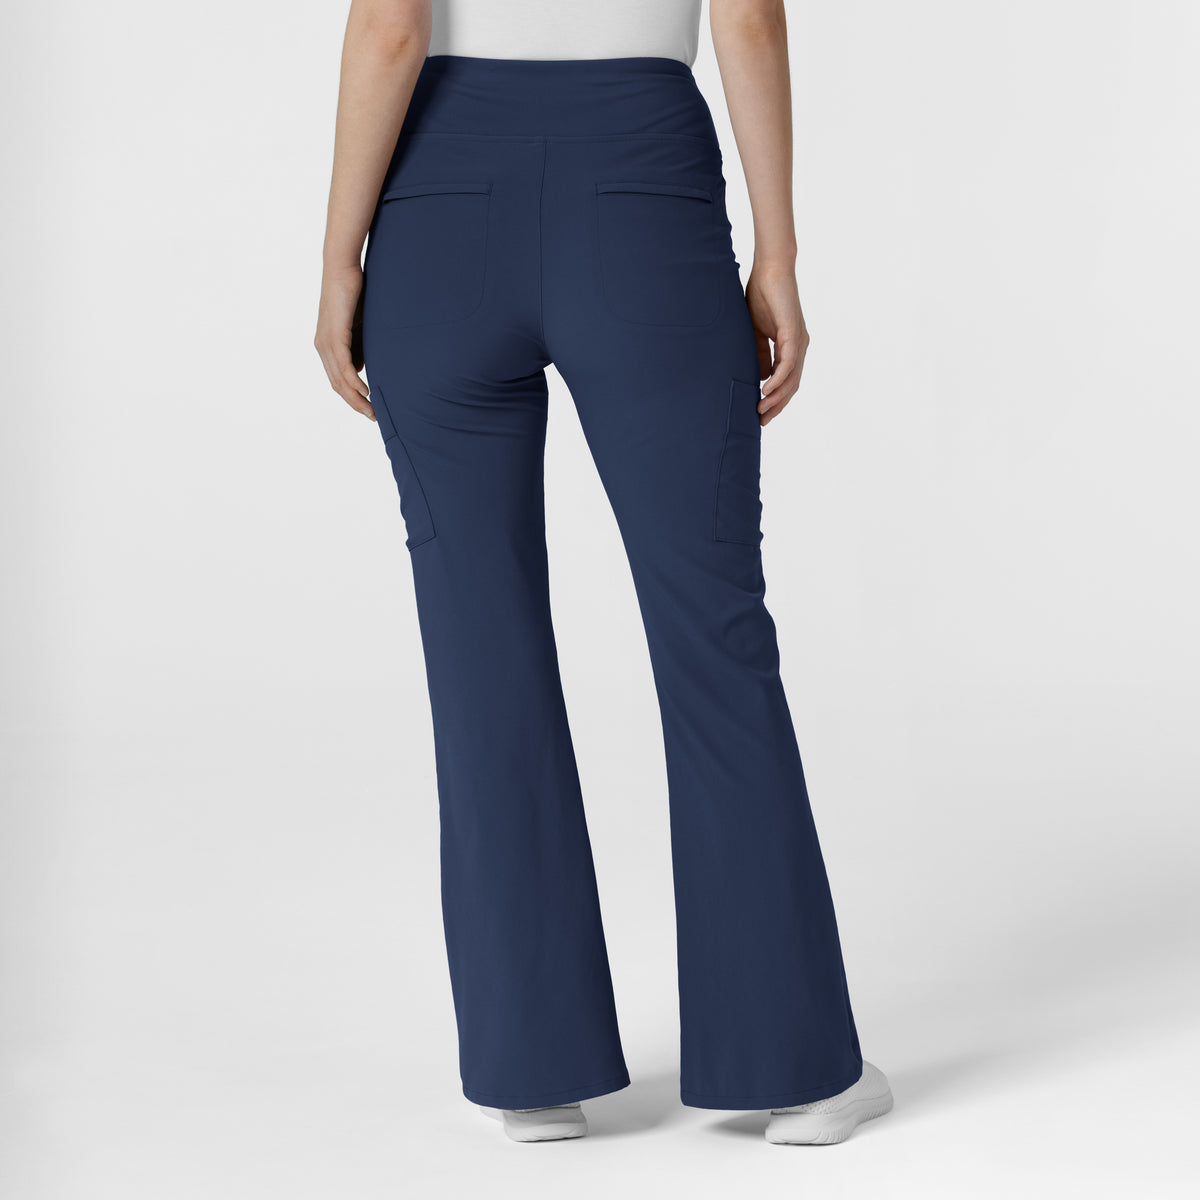 RENEW Women's Front Slit Flare Scrub Pant Navy back view